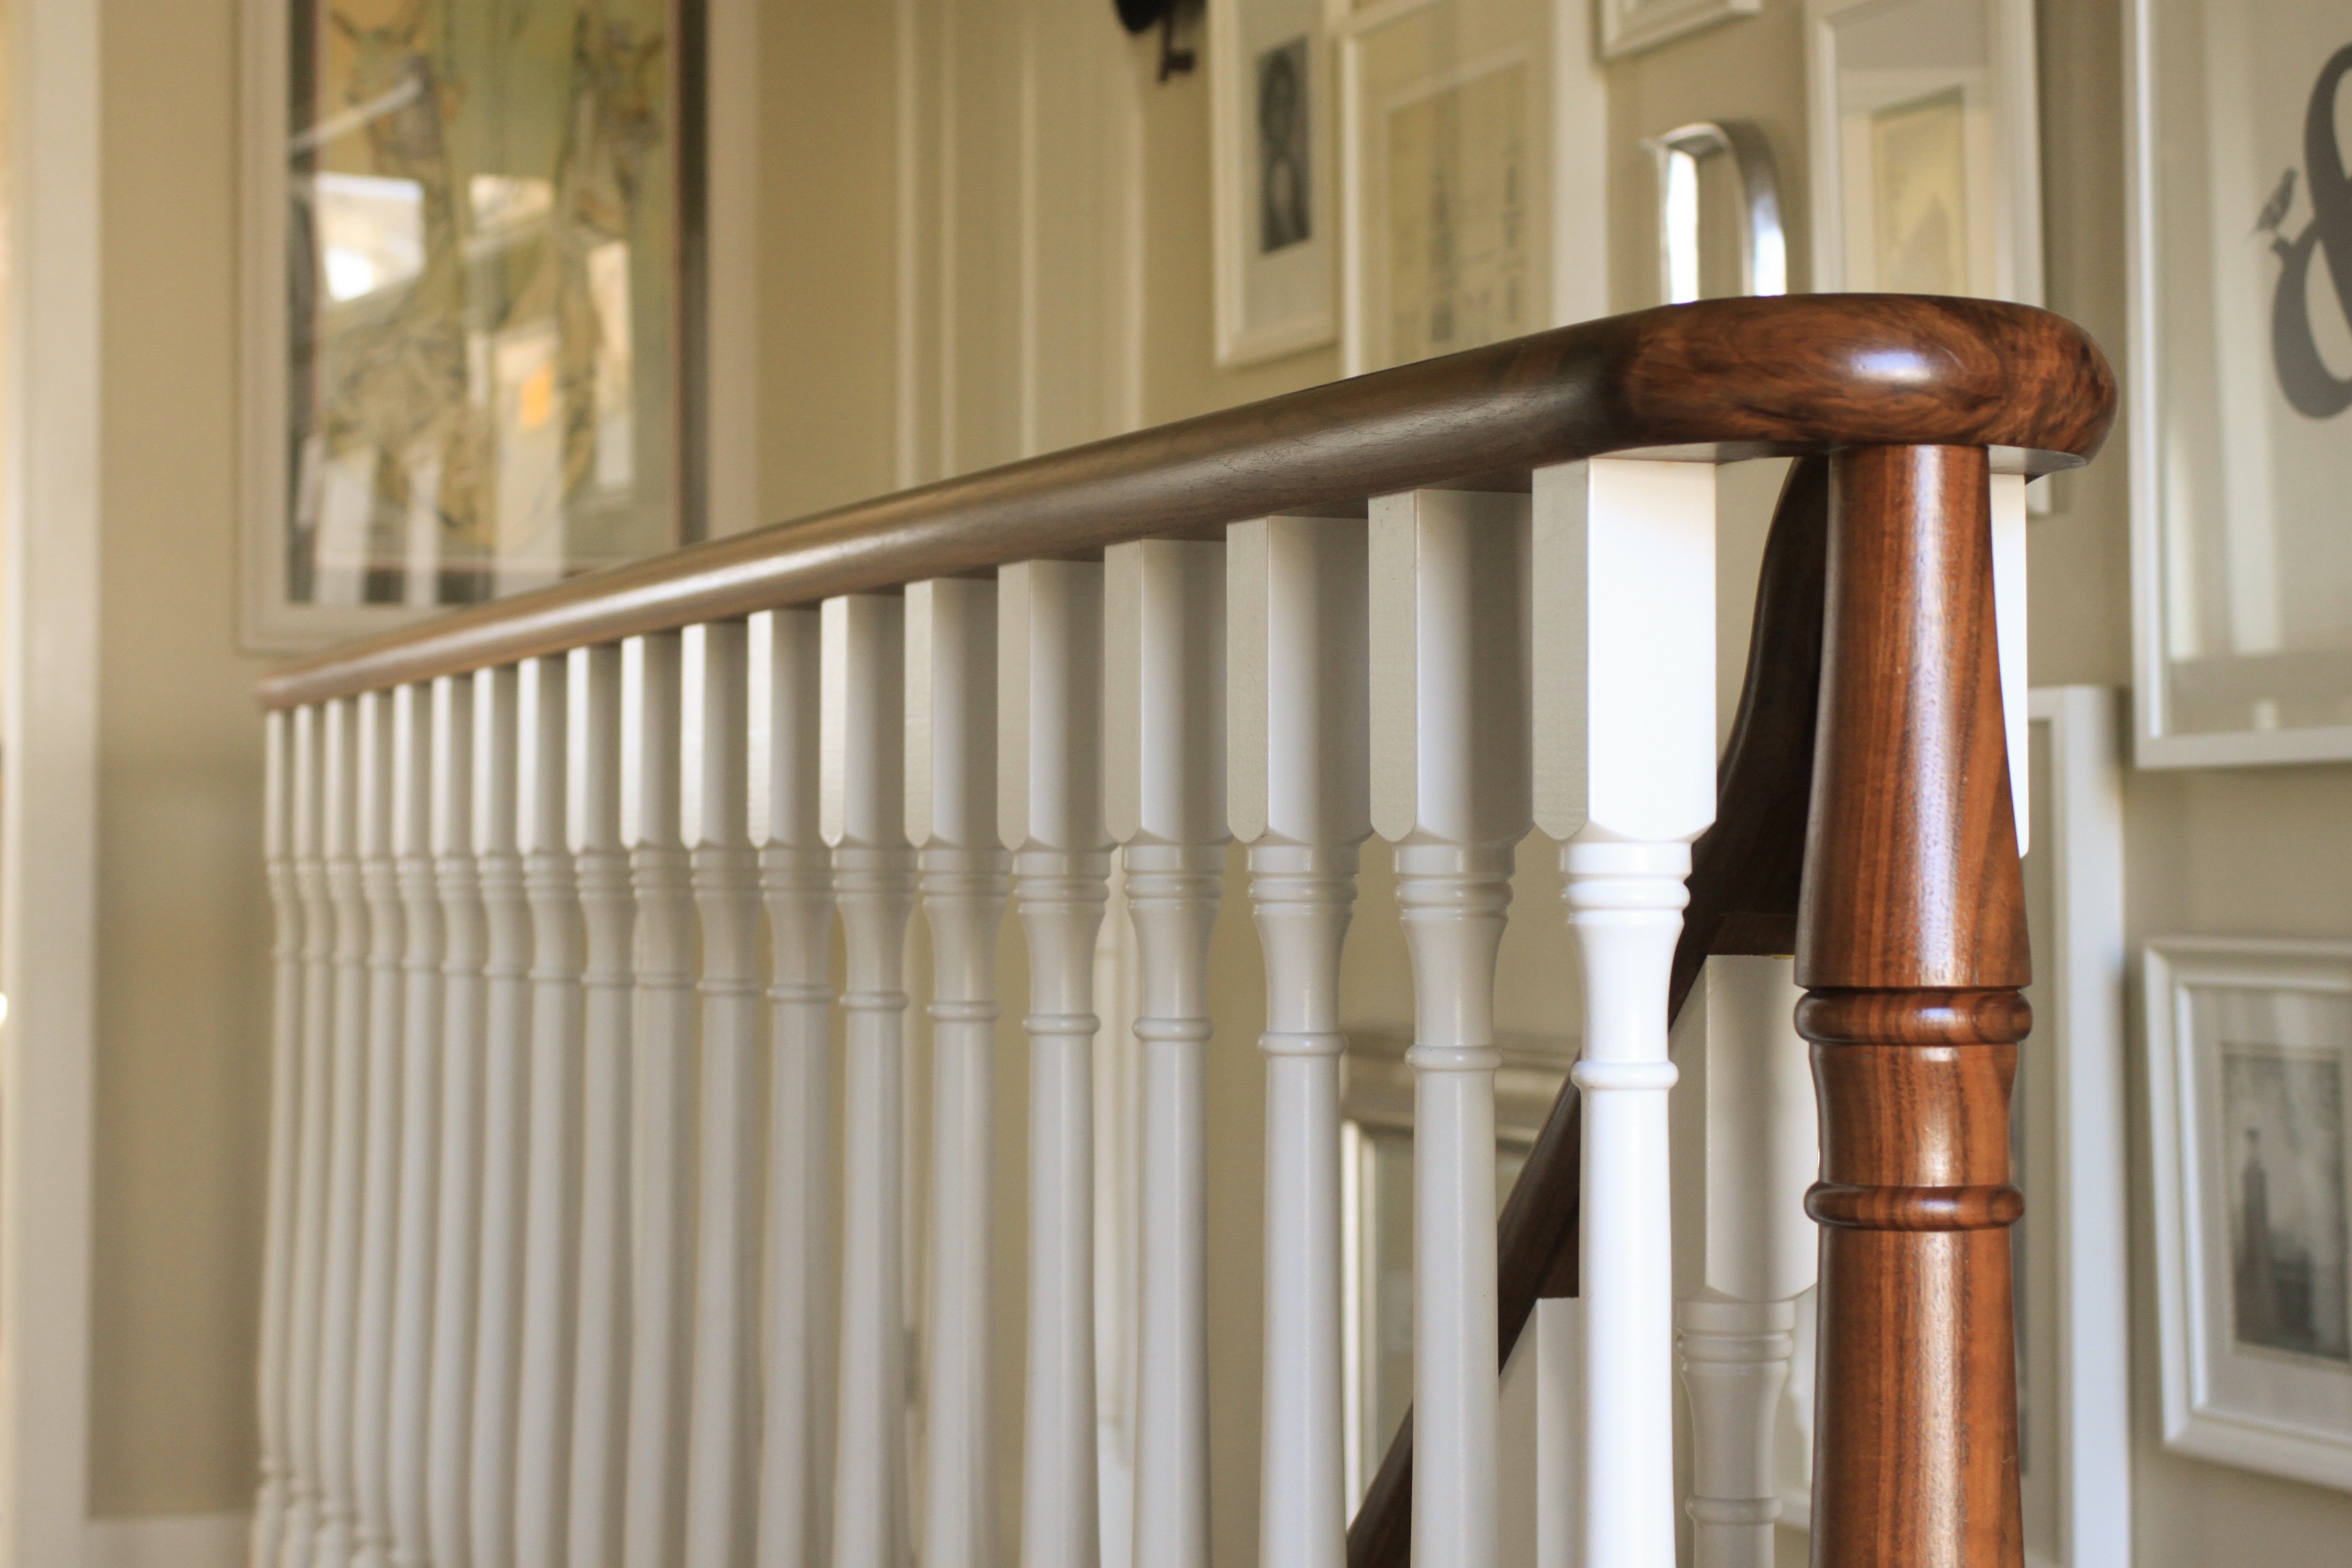 walnut/painted spindles